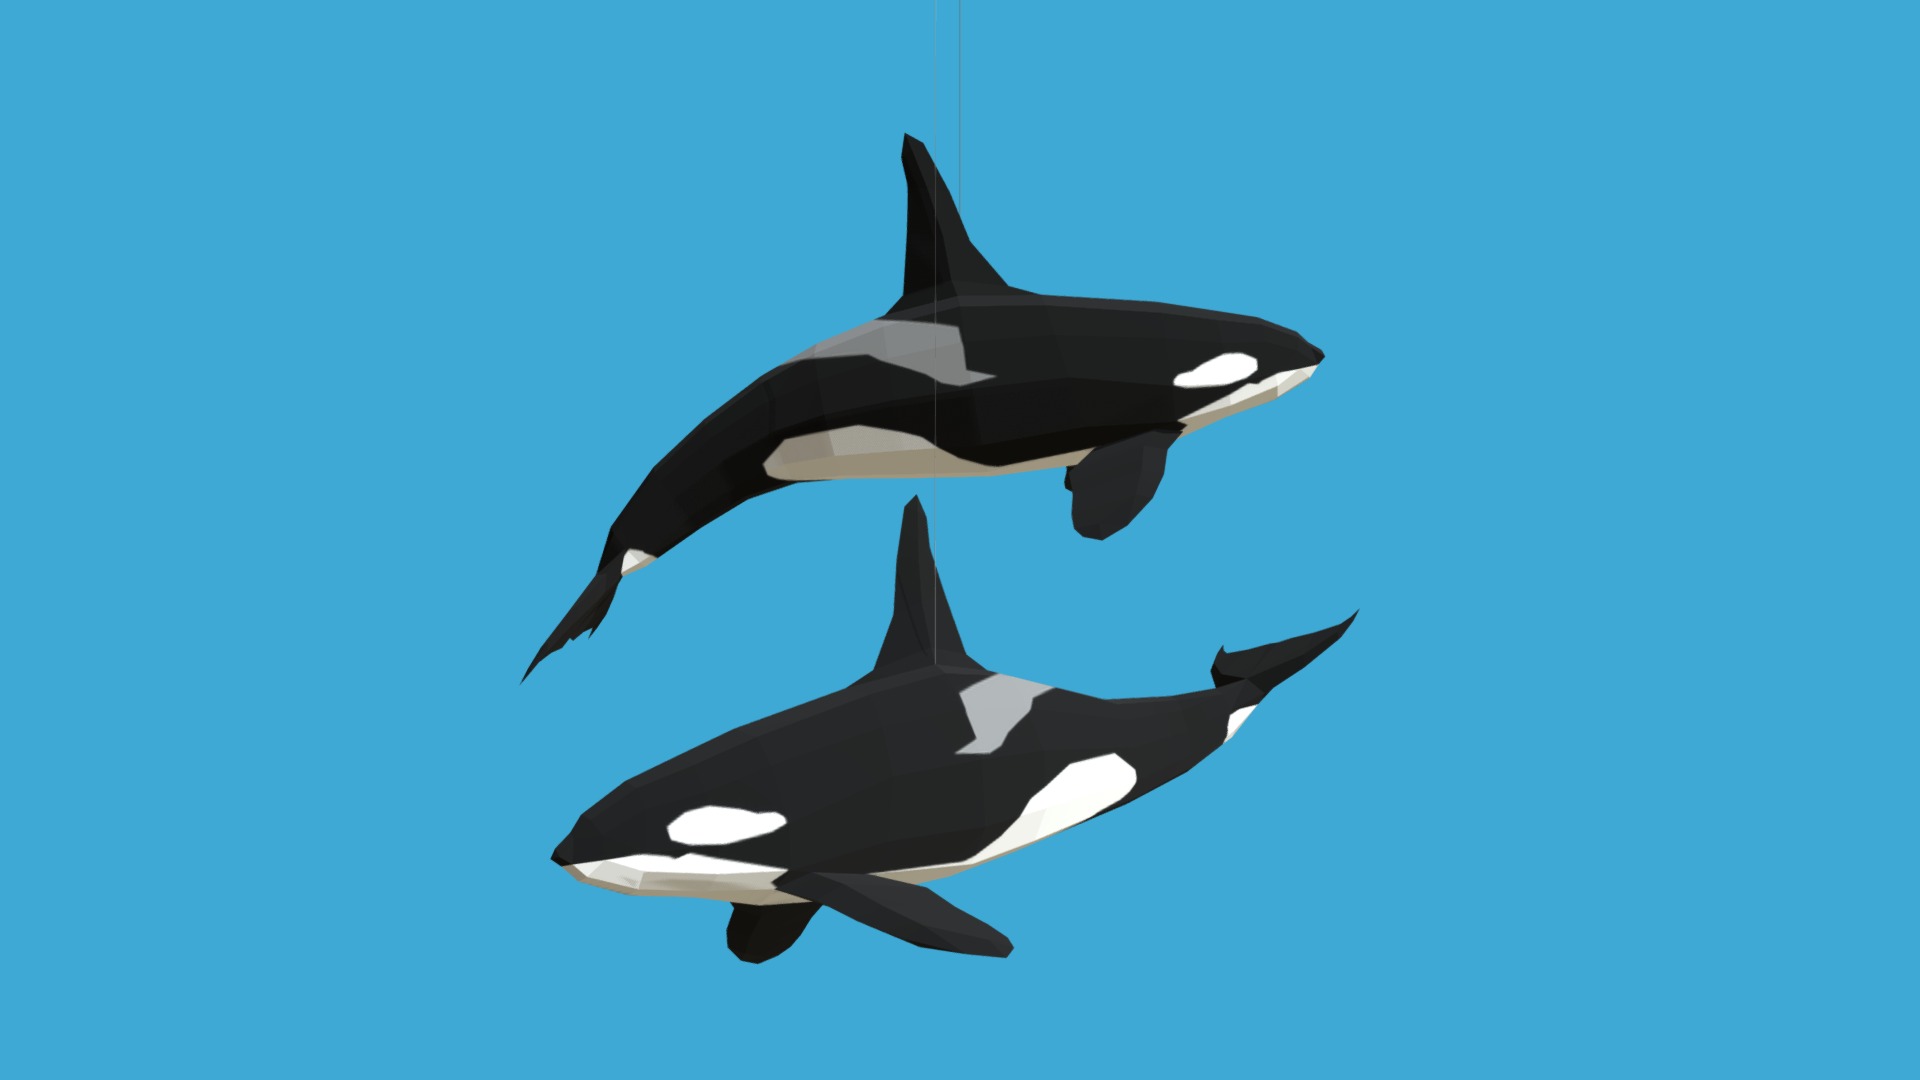 3D model Orcas - This is a 3D model of the Orcas. The 3D model is about a pair of black and white whales in the sky.